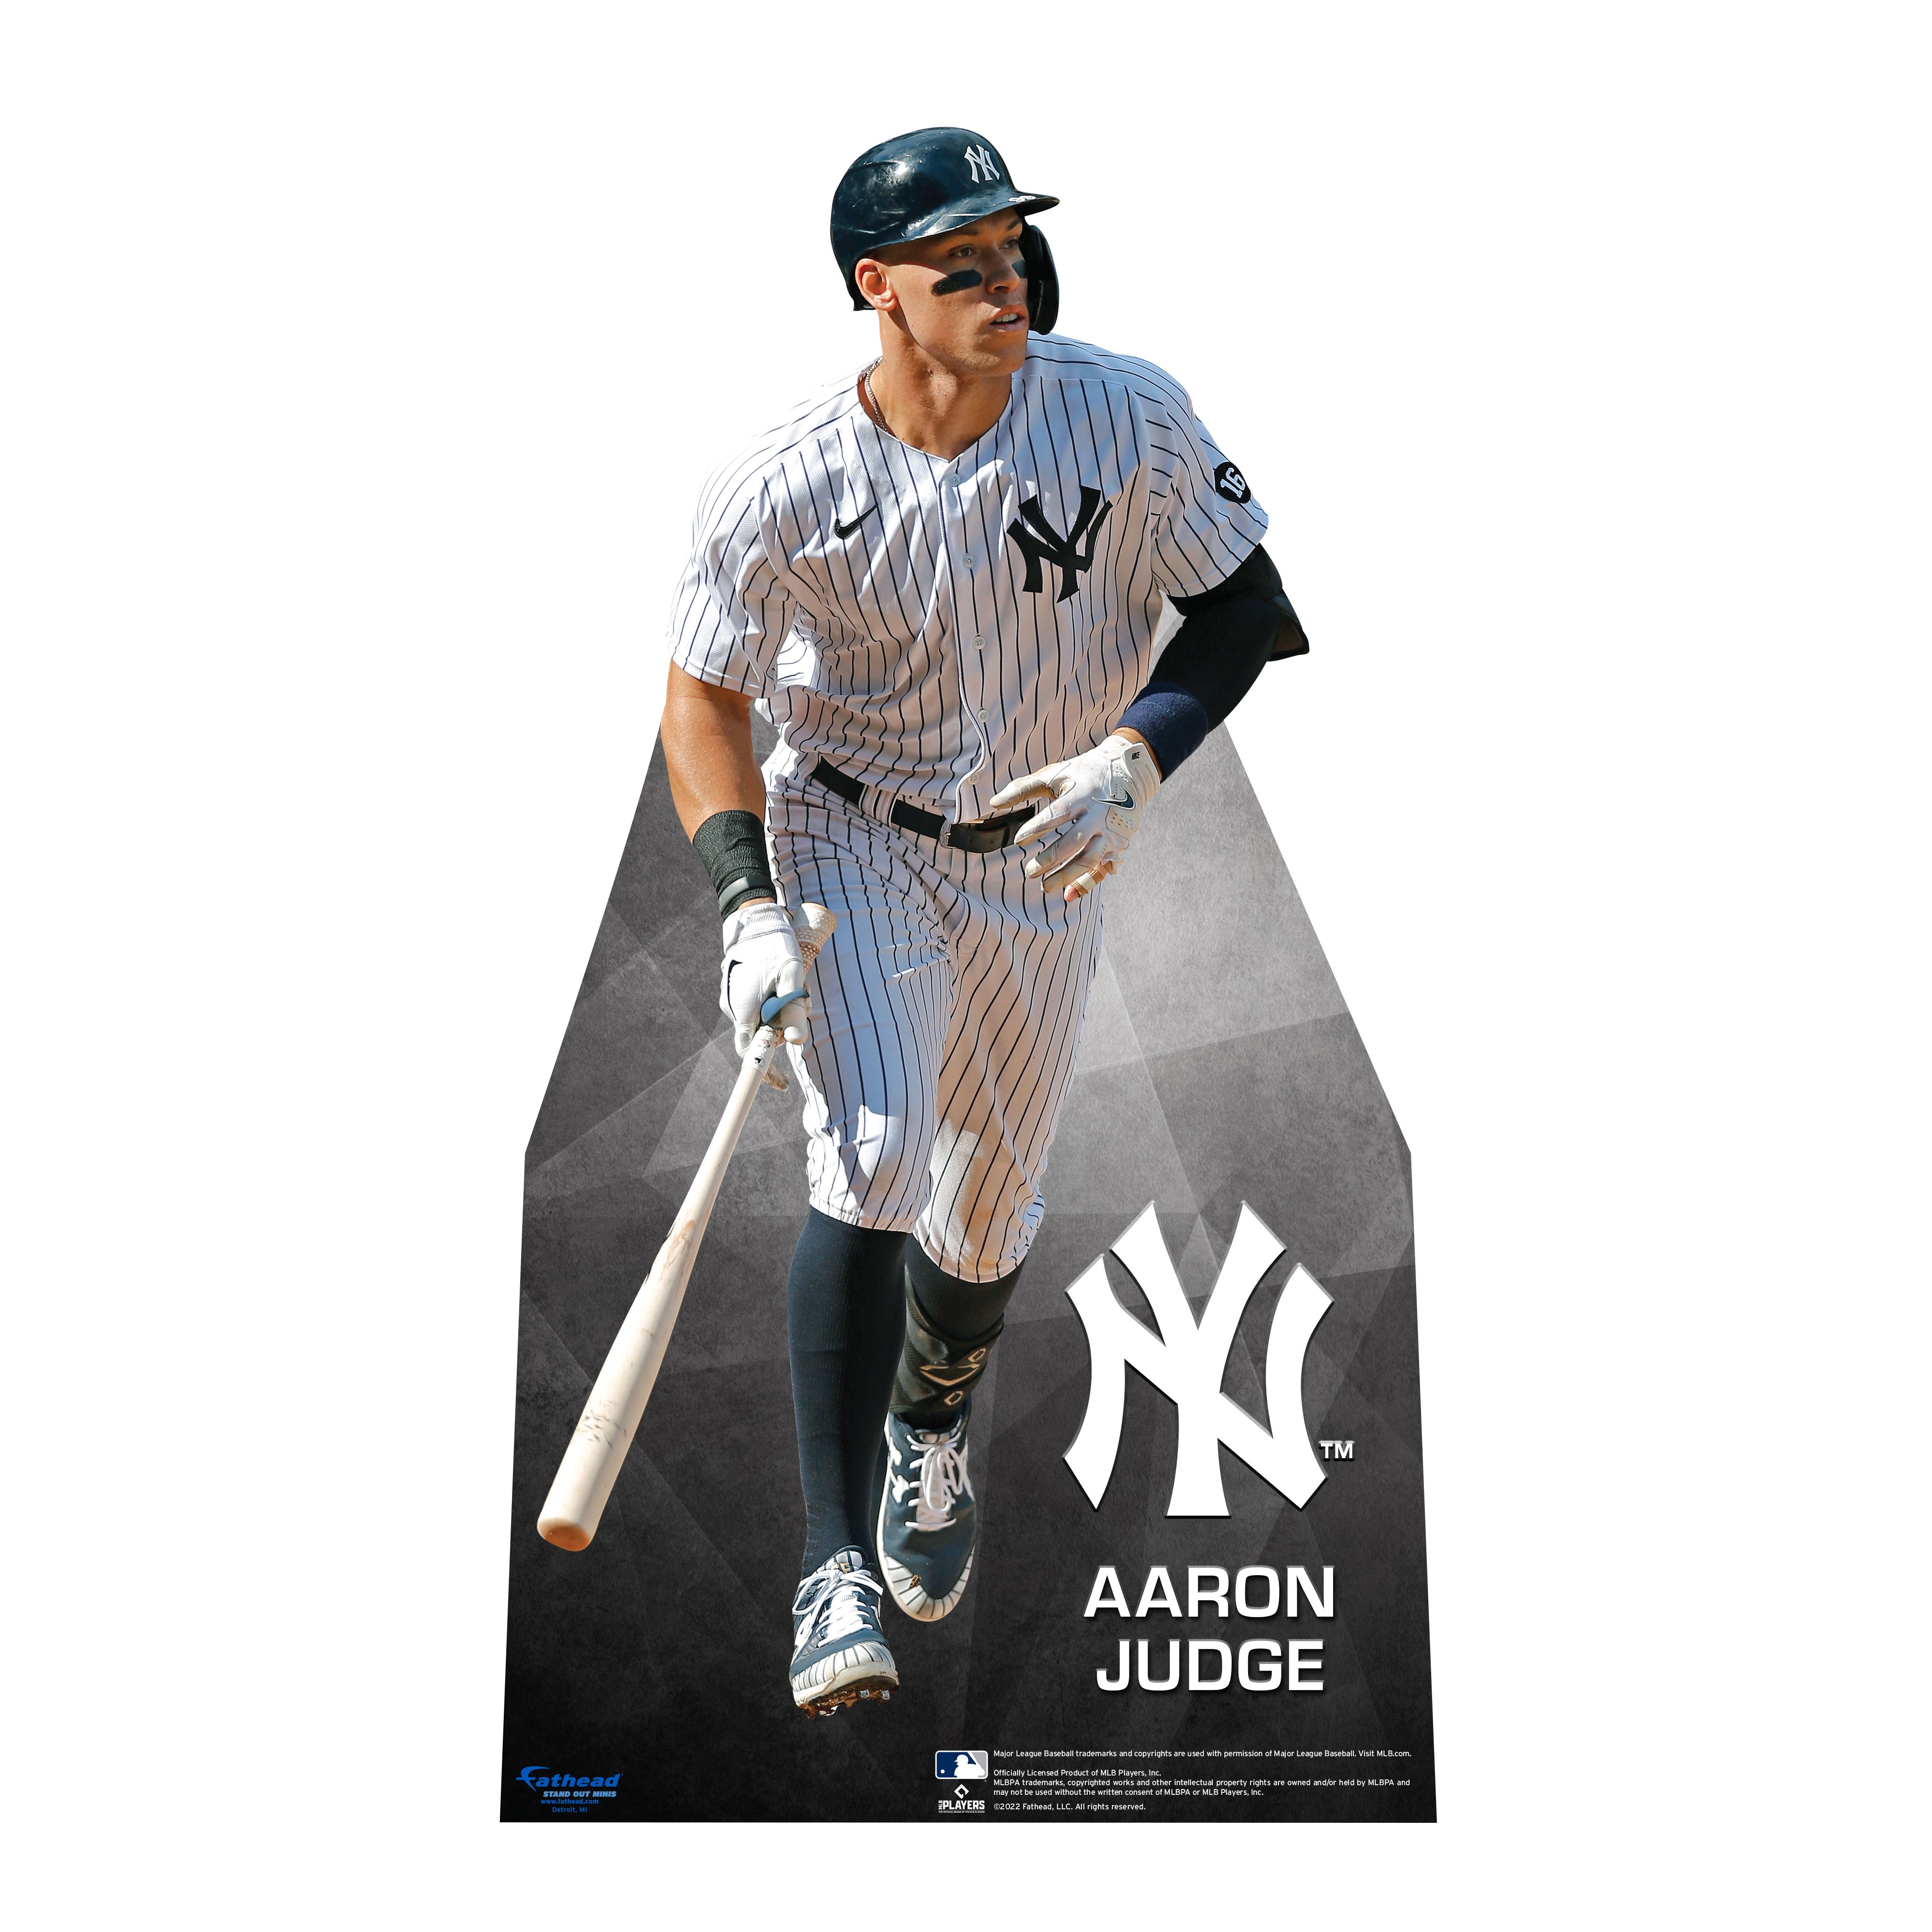 Fathead Aaron Judge New York Yankees Swing Life Size Removable Wall Decal